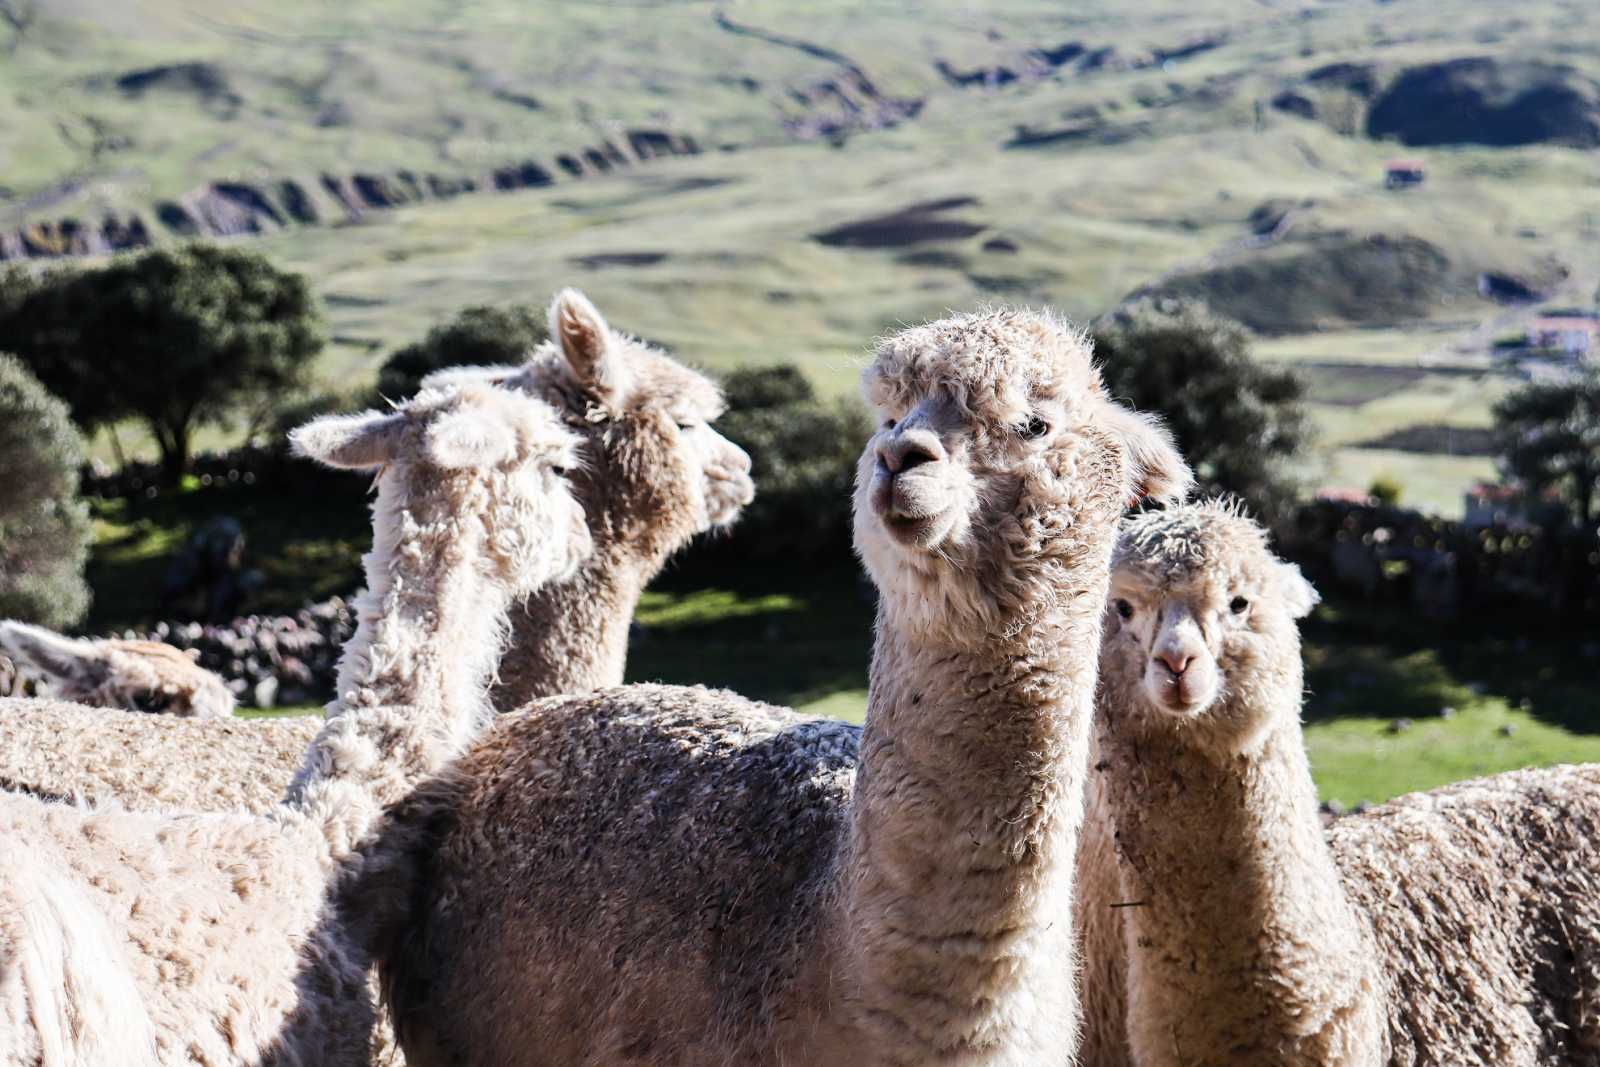 Discover the beauty and variety of Ausangate's alpacas